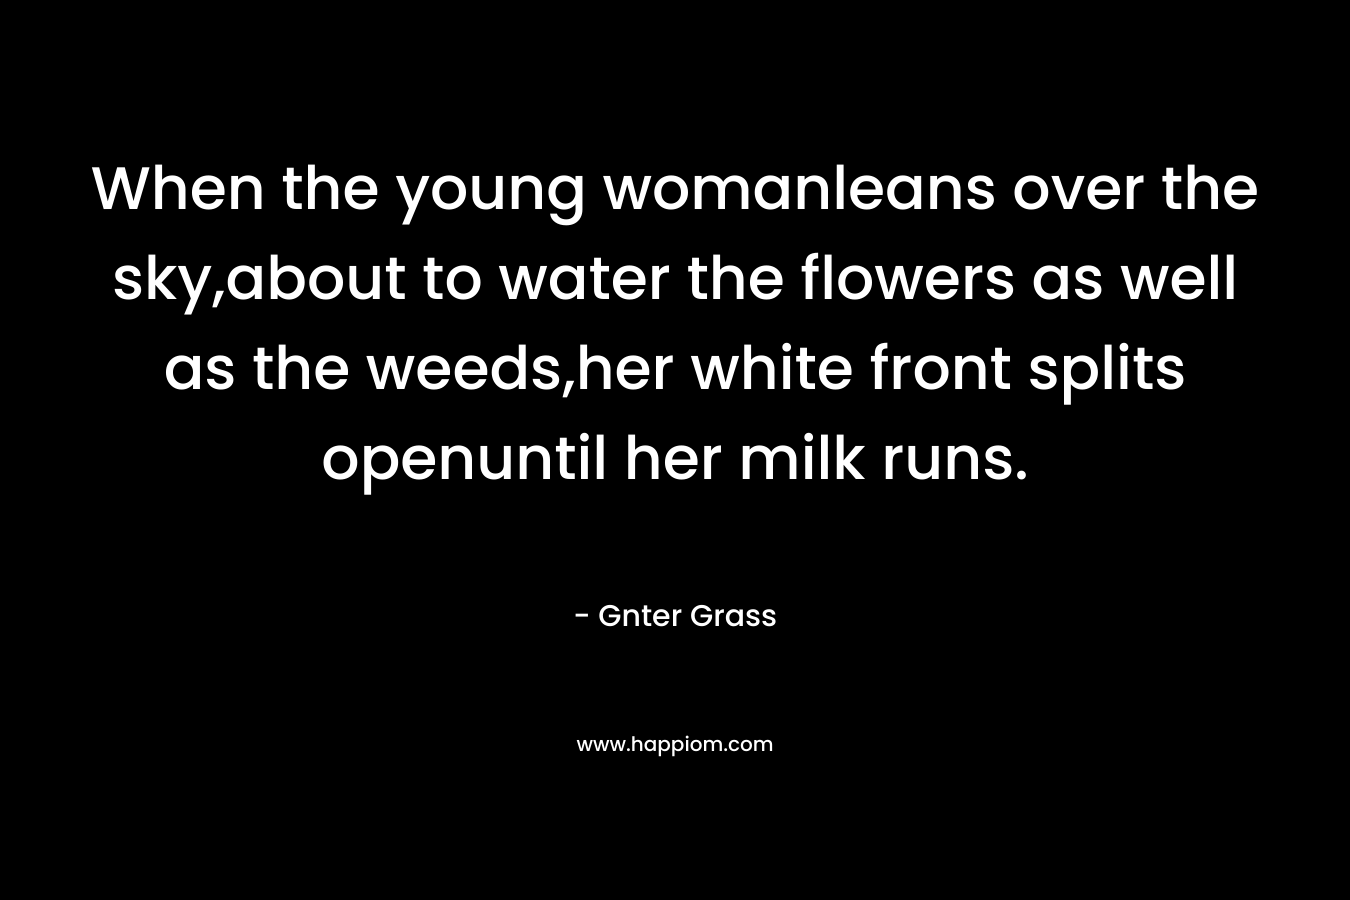 When the young womanleans over the sky,about to water the flowers as well as the weeds,her white front splits openuntil her milk runs.